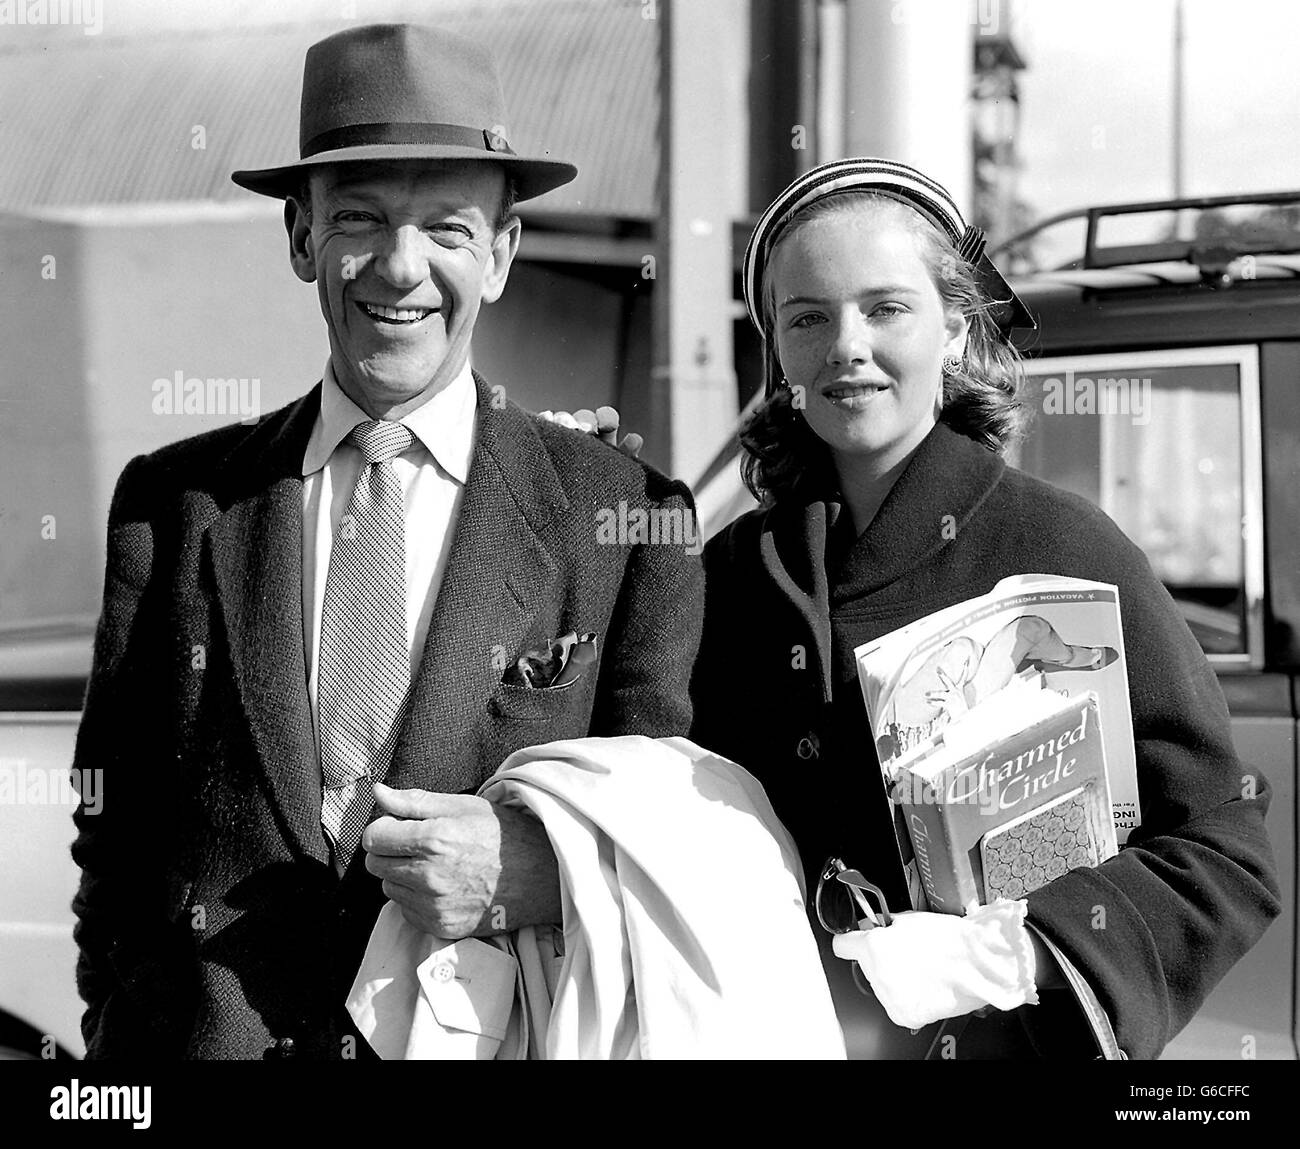 The man with the magic feet, Hollywood dancing star Fred Astaire, is pictured with his 14-year-old daughter Ava on their arrival at London Airport from New York. Stock Photo